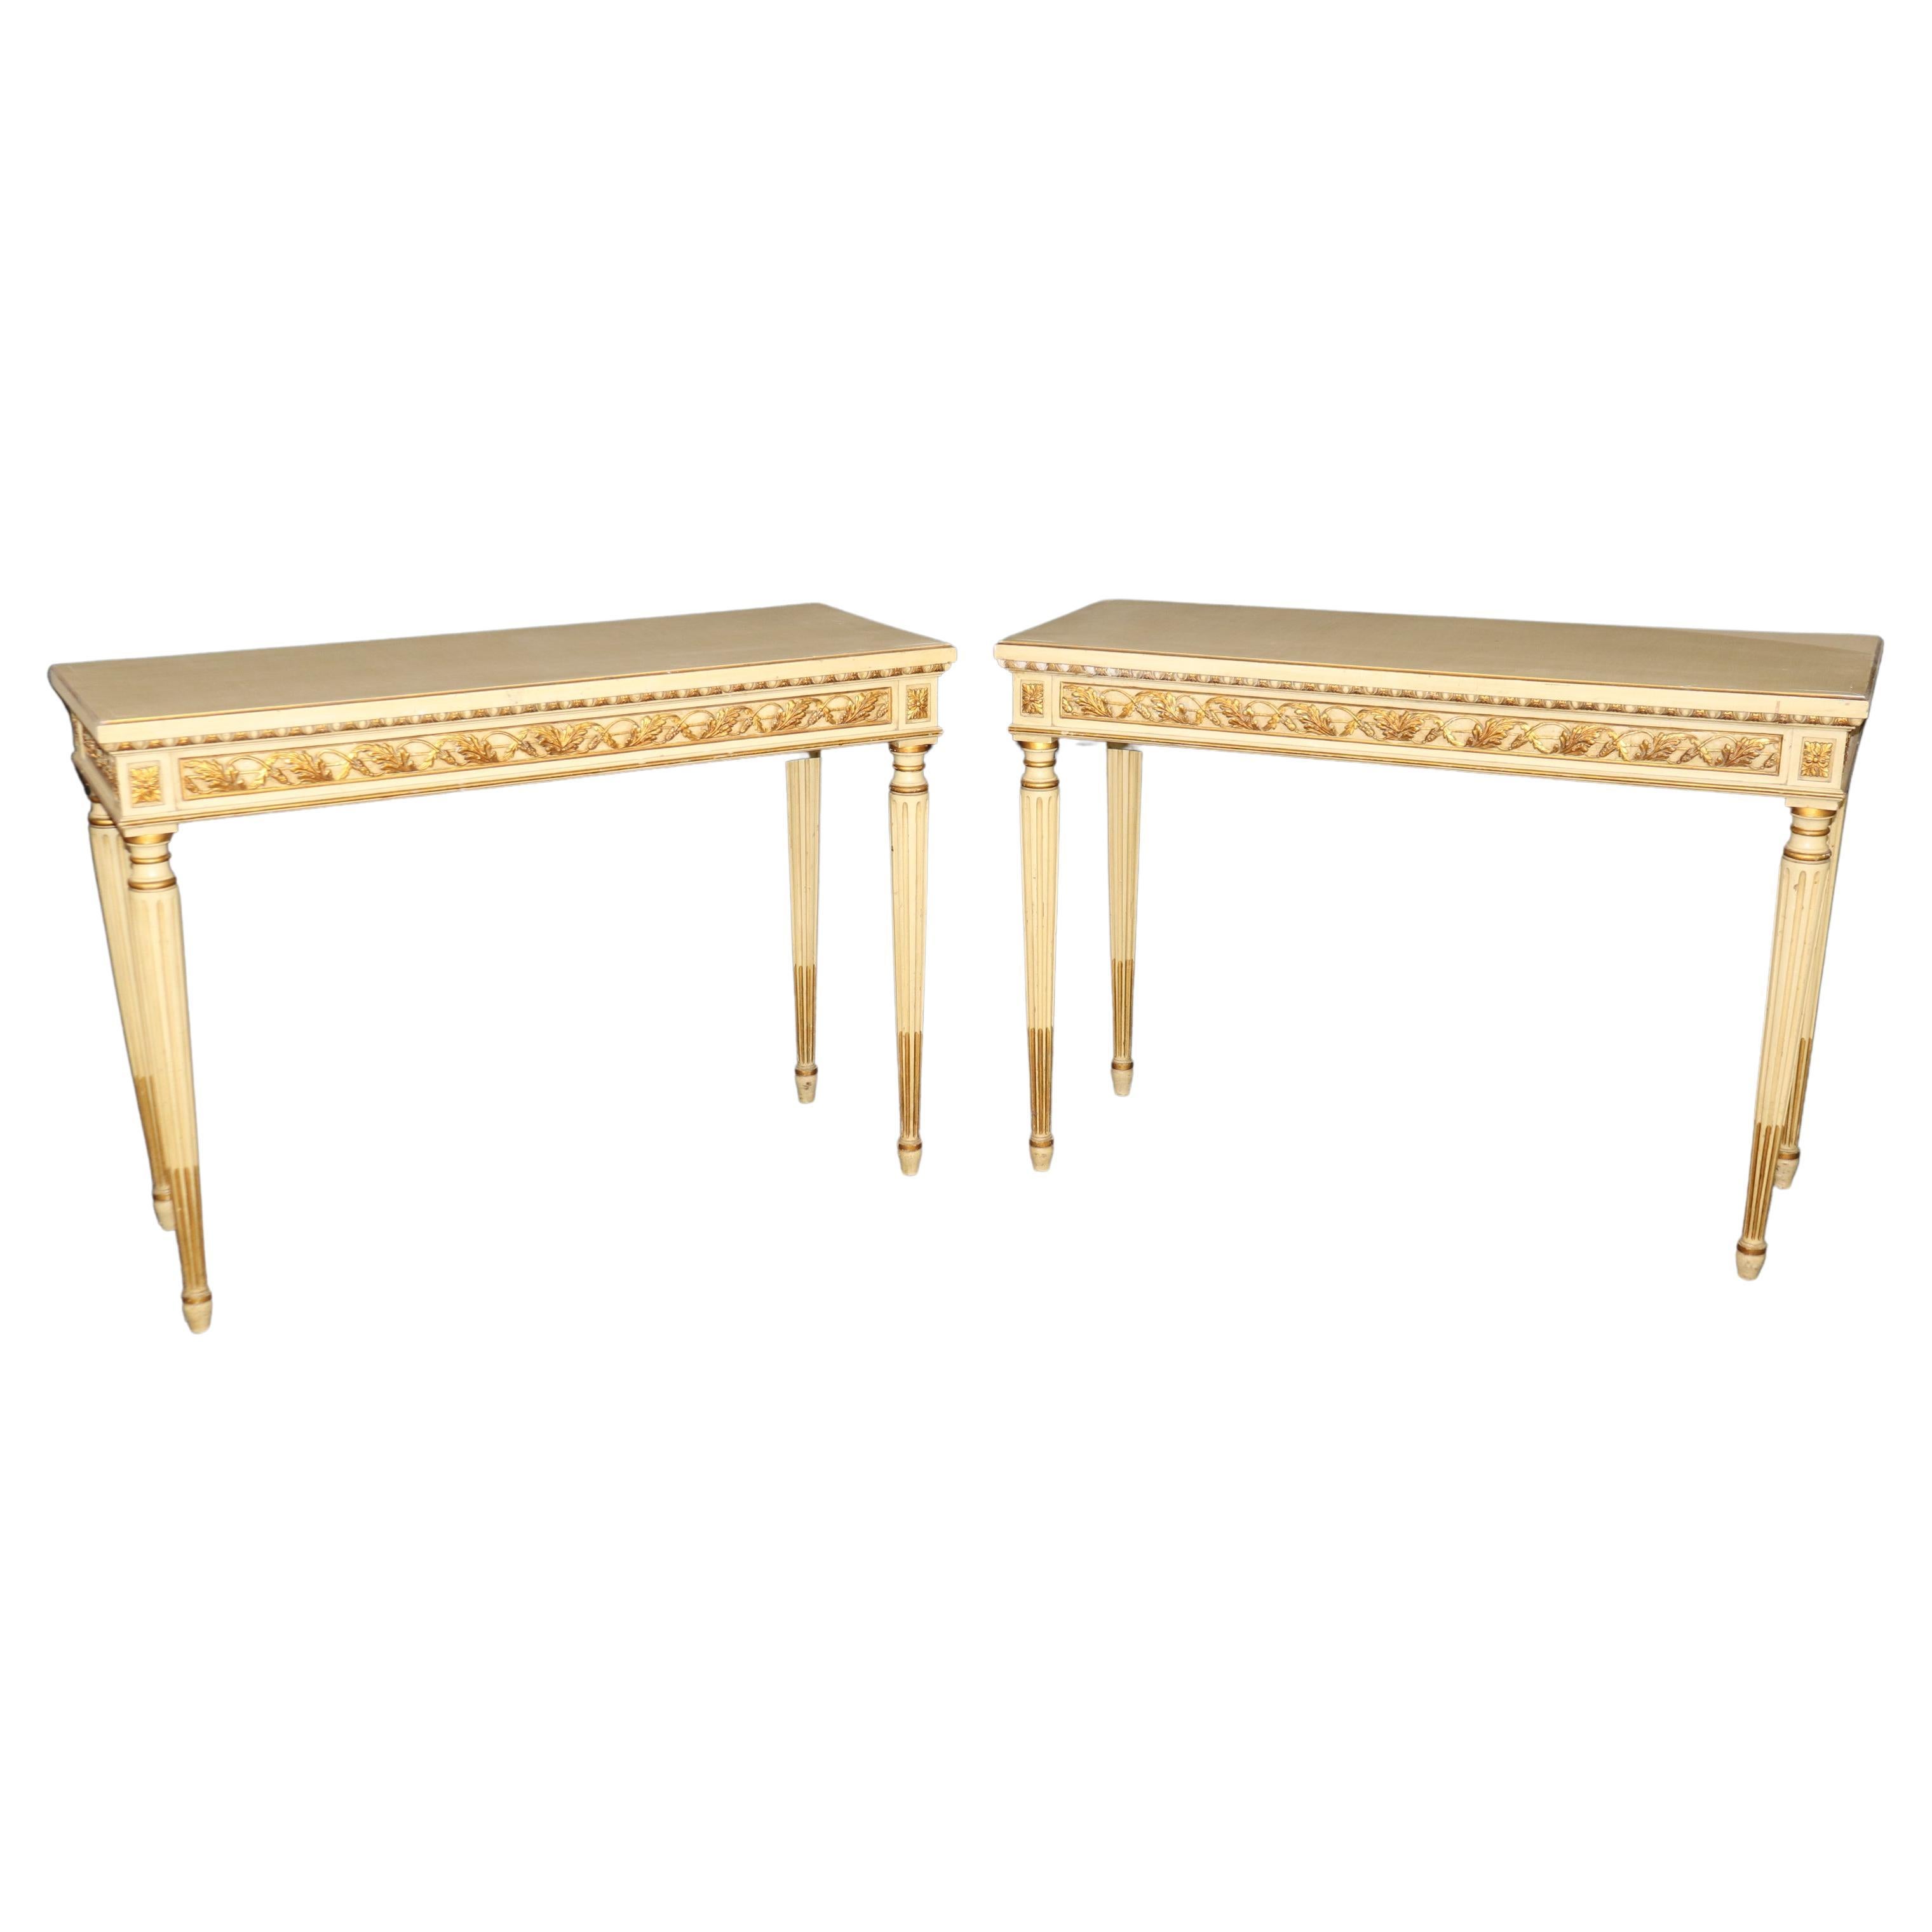 Pair of Finely Carved Creme Painted Gilded French Louis XVI Style Console Tables For Sale